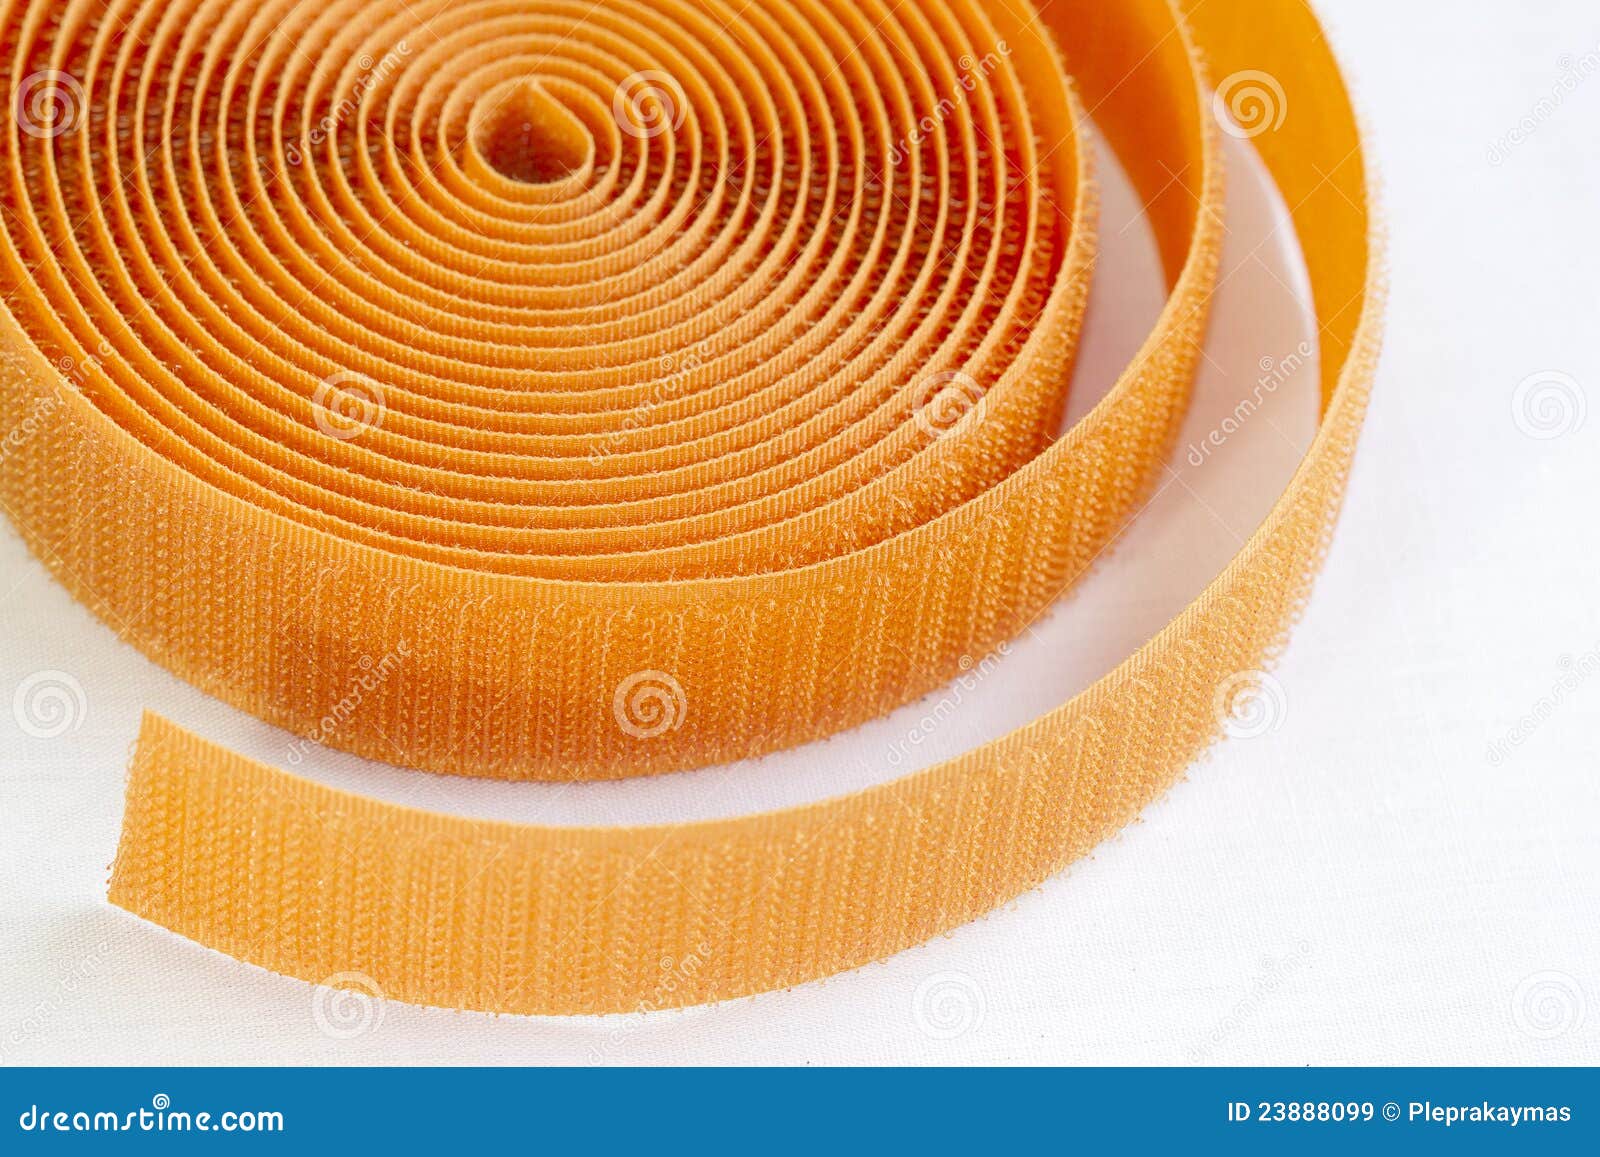 Roll of Velcro close up stock image. Image of stick, join - 23888099